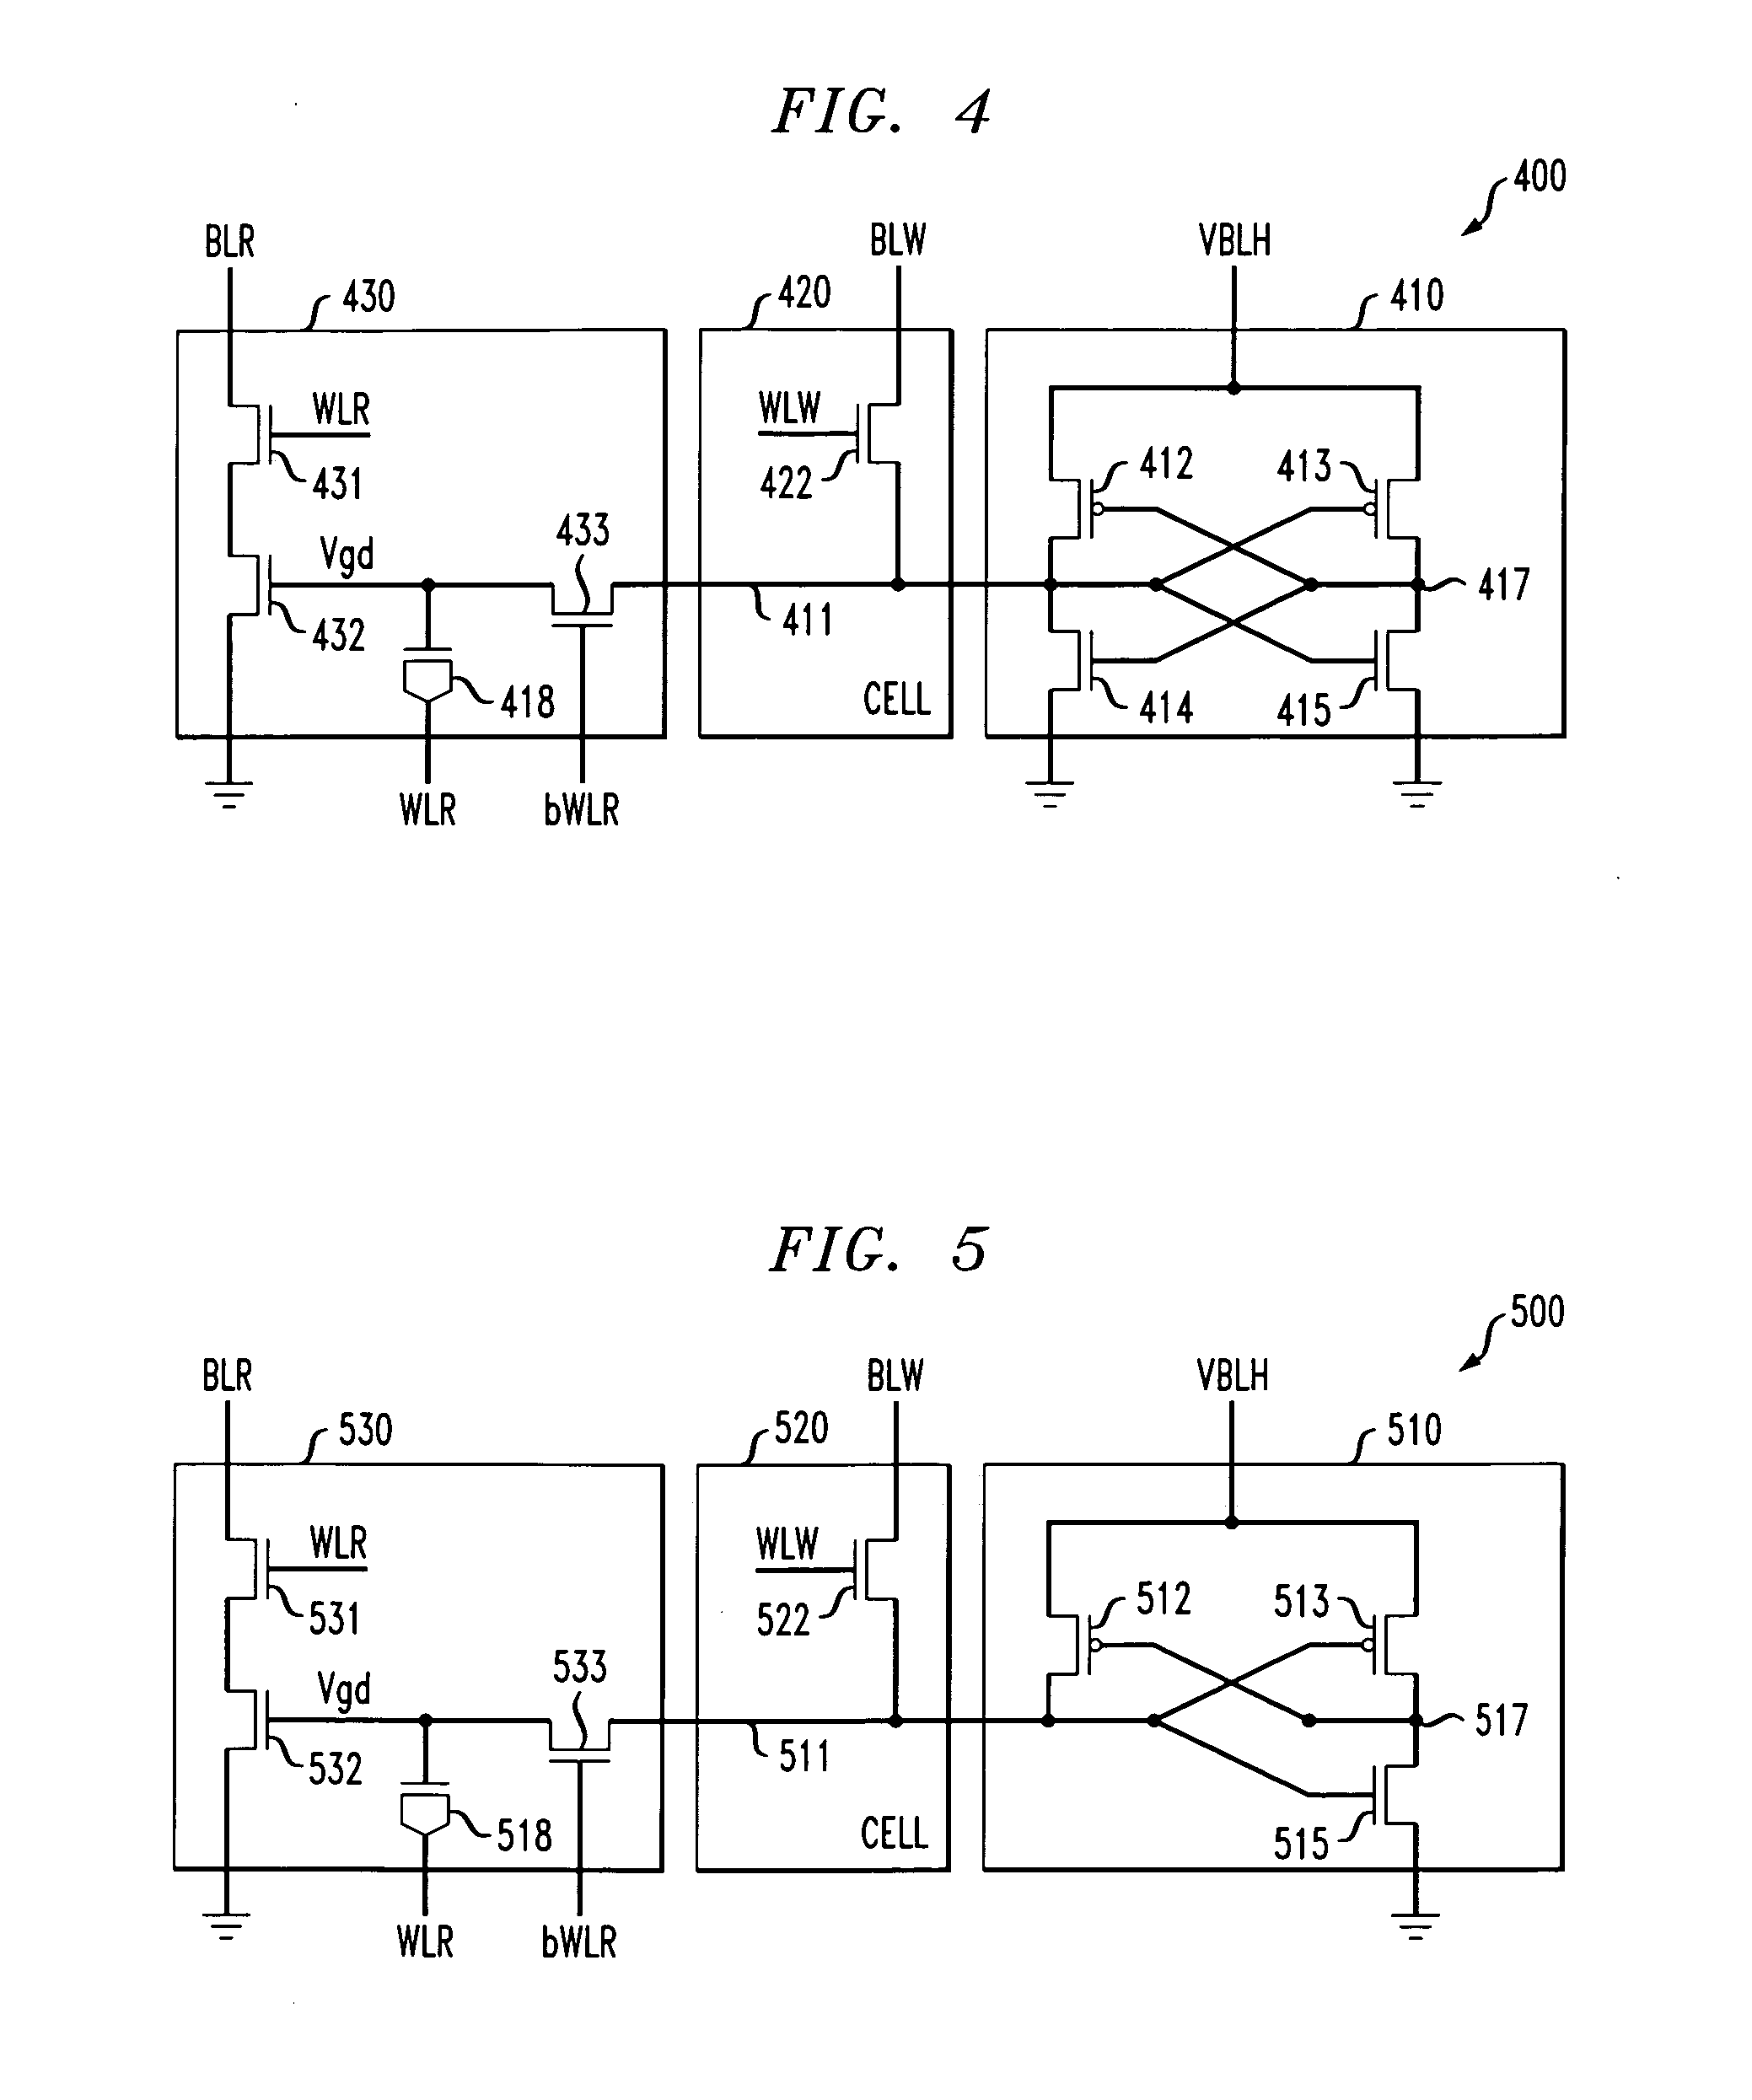 Static random access memory utilizing gated diode technology